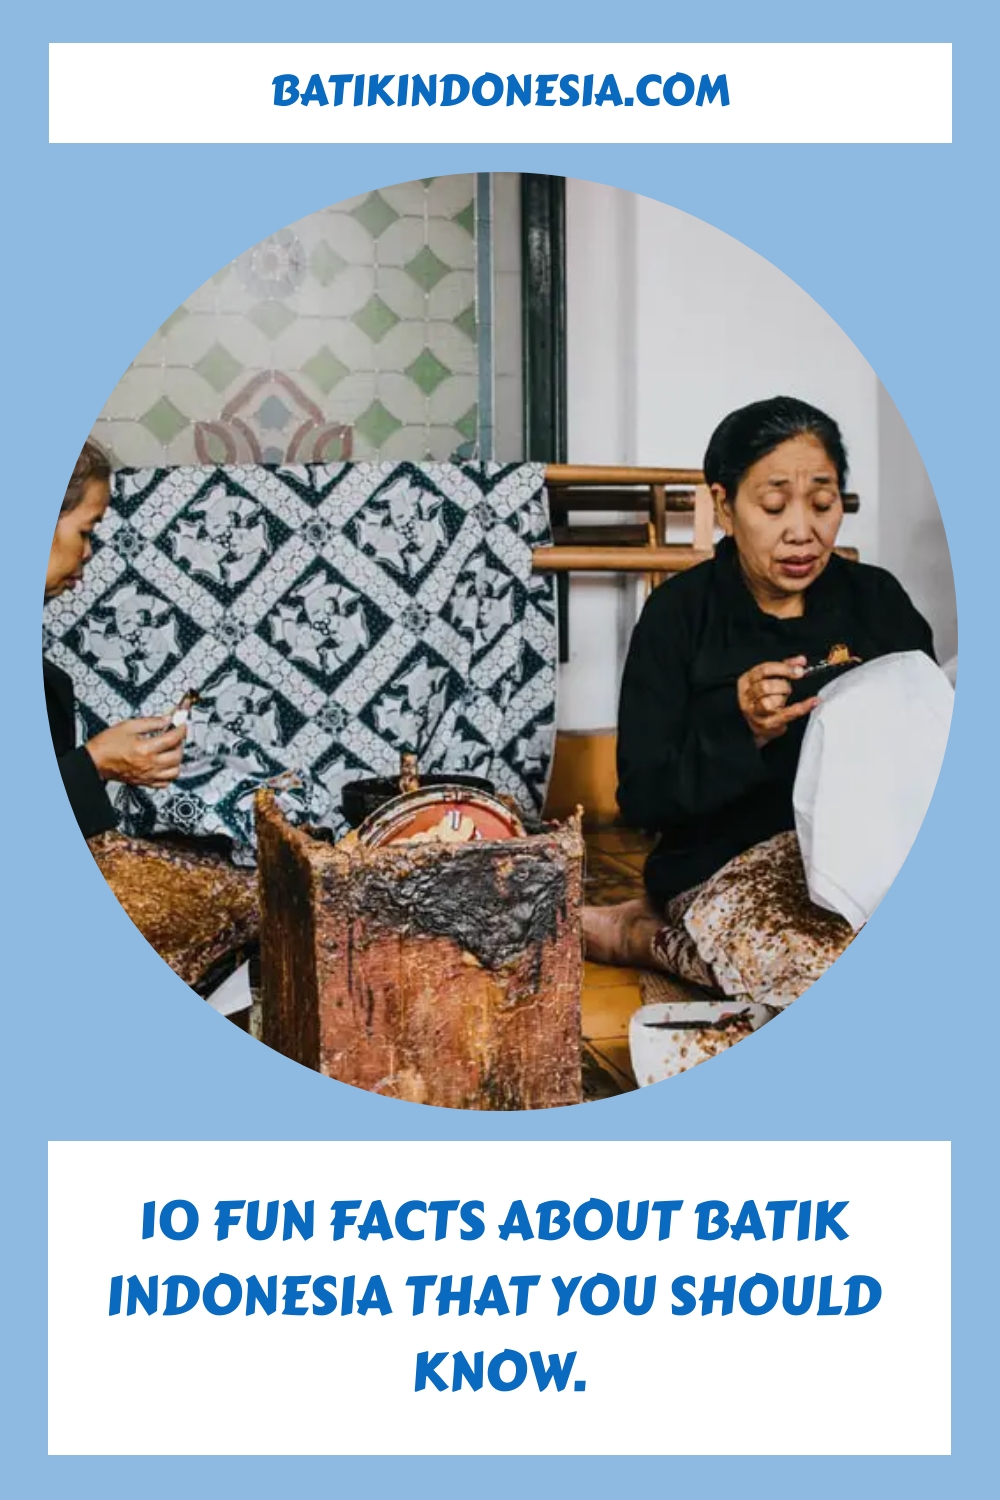 10 Fun Facts About Batik Indonesia That You Should Know. generated pin 37099